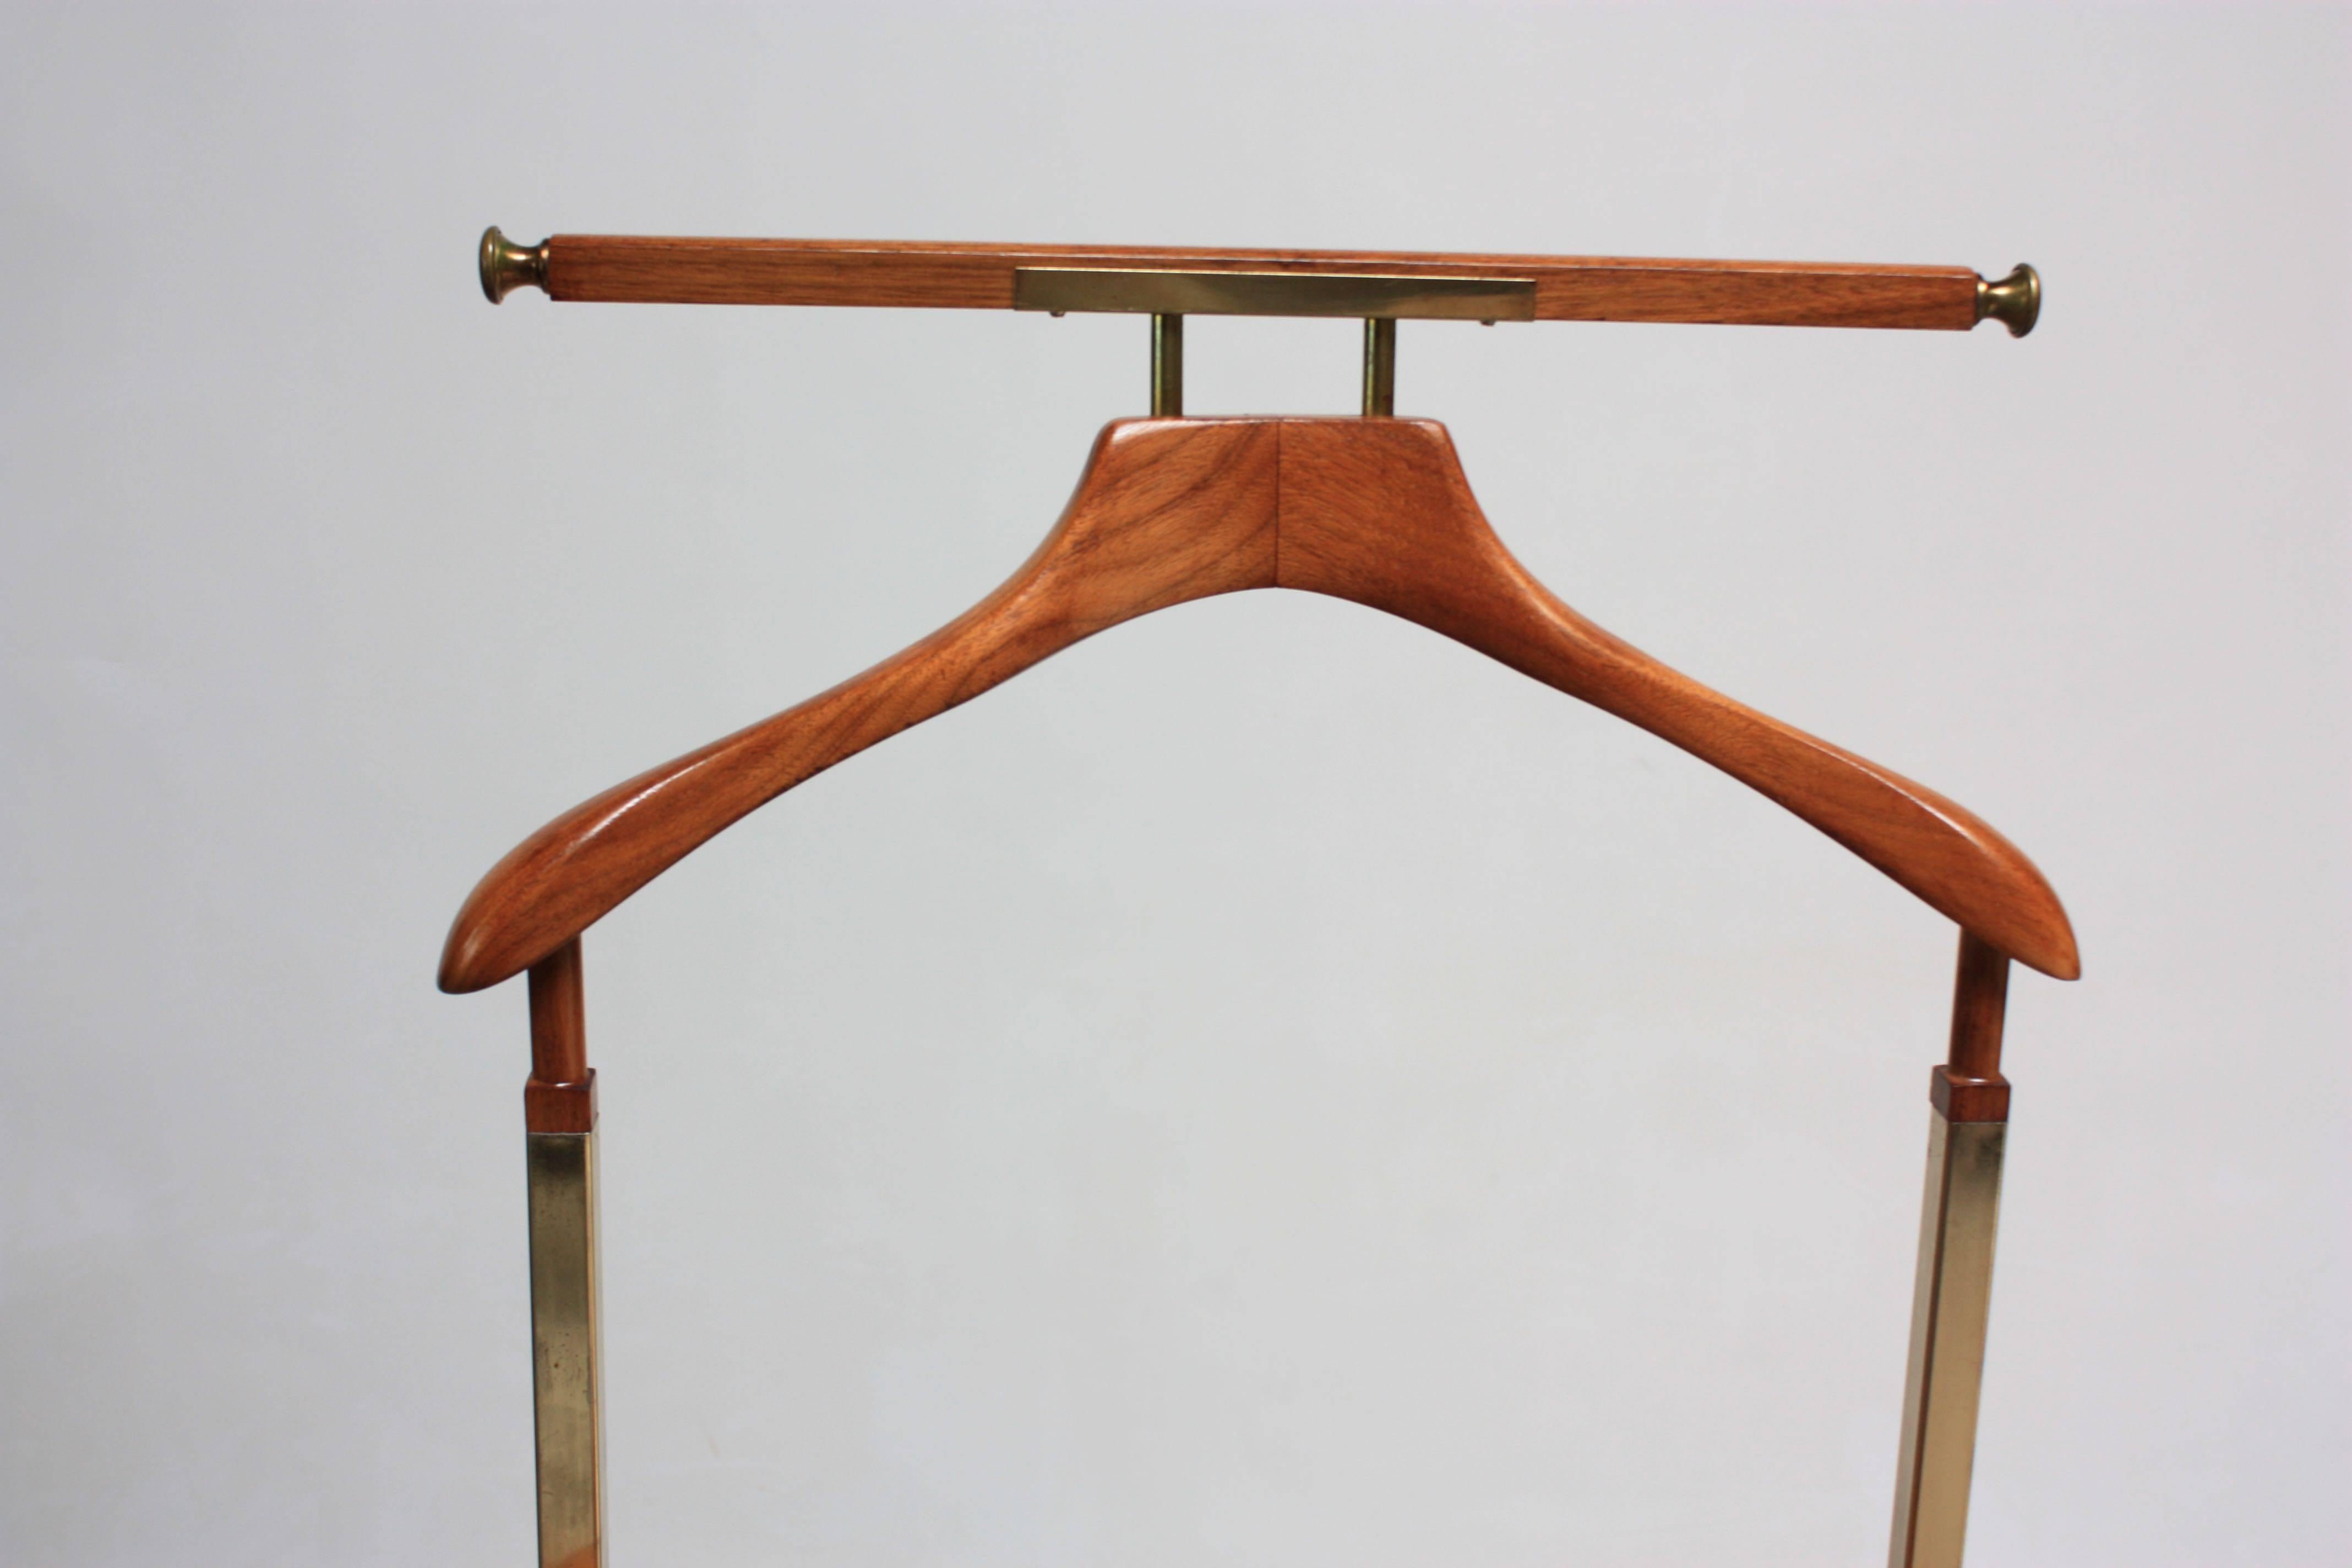 This elegant brass, maple and burl valet stand features an interlinking tubular brass frame, maple hanger and change or cufflink holder, and a cane-topped, burl-veneer drawer. The top bar is intended for hanging scarves, ties, or pants. 
The length